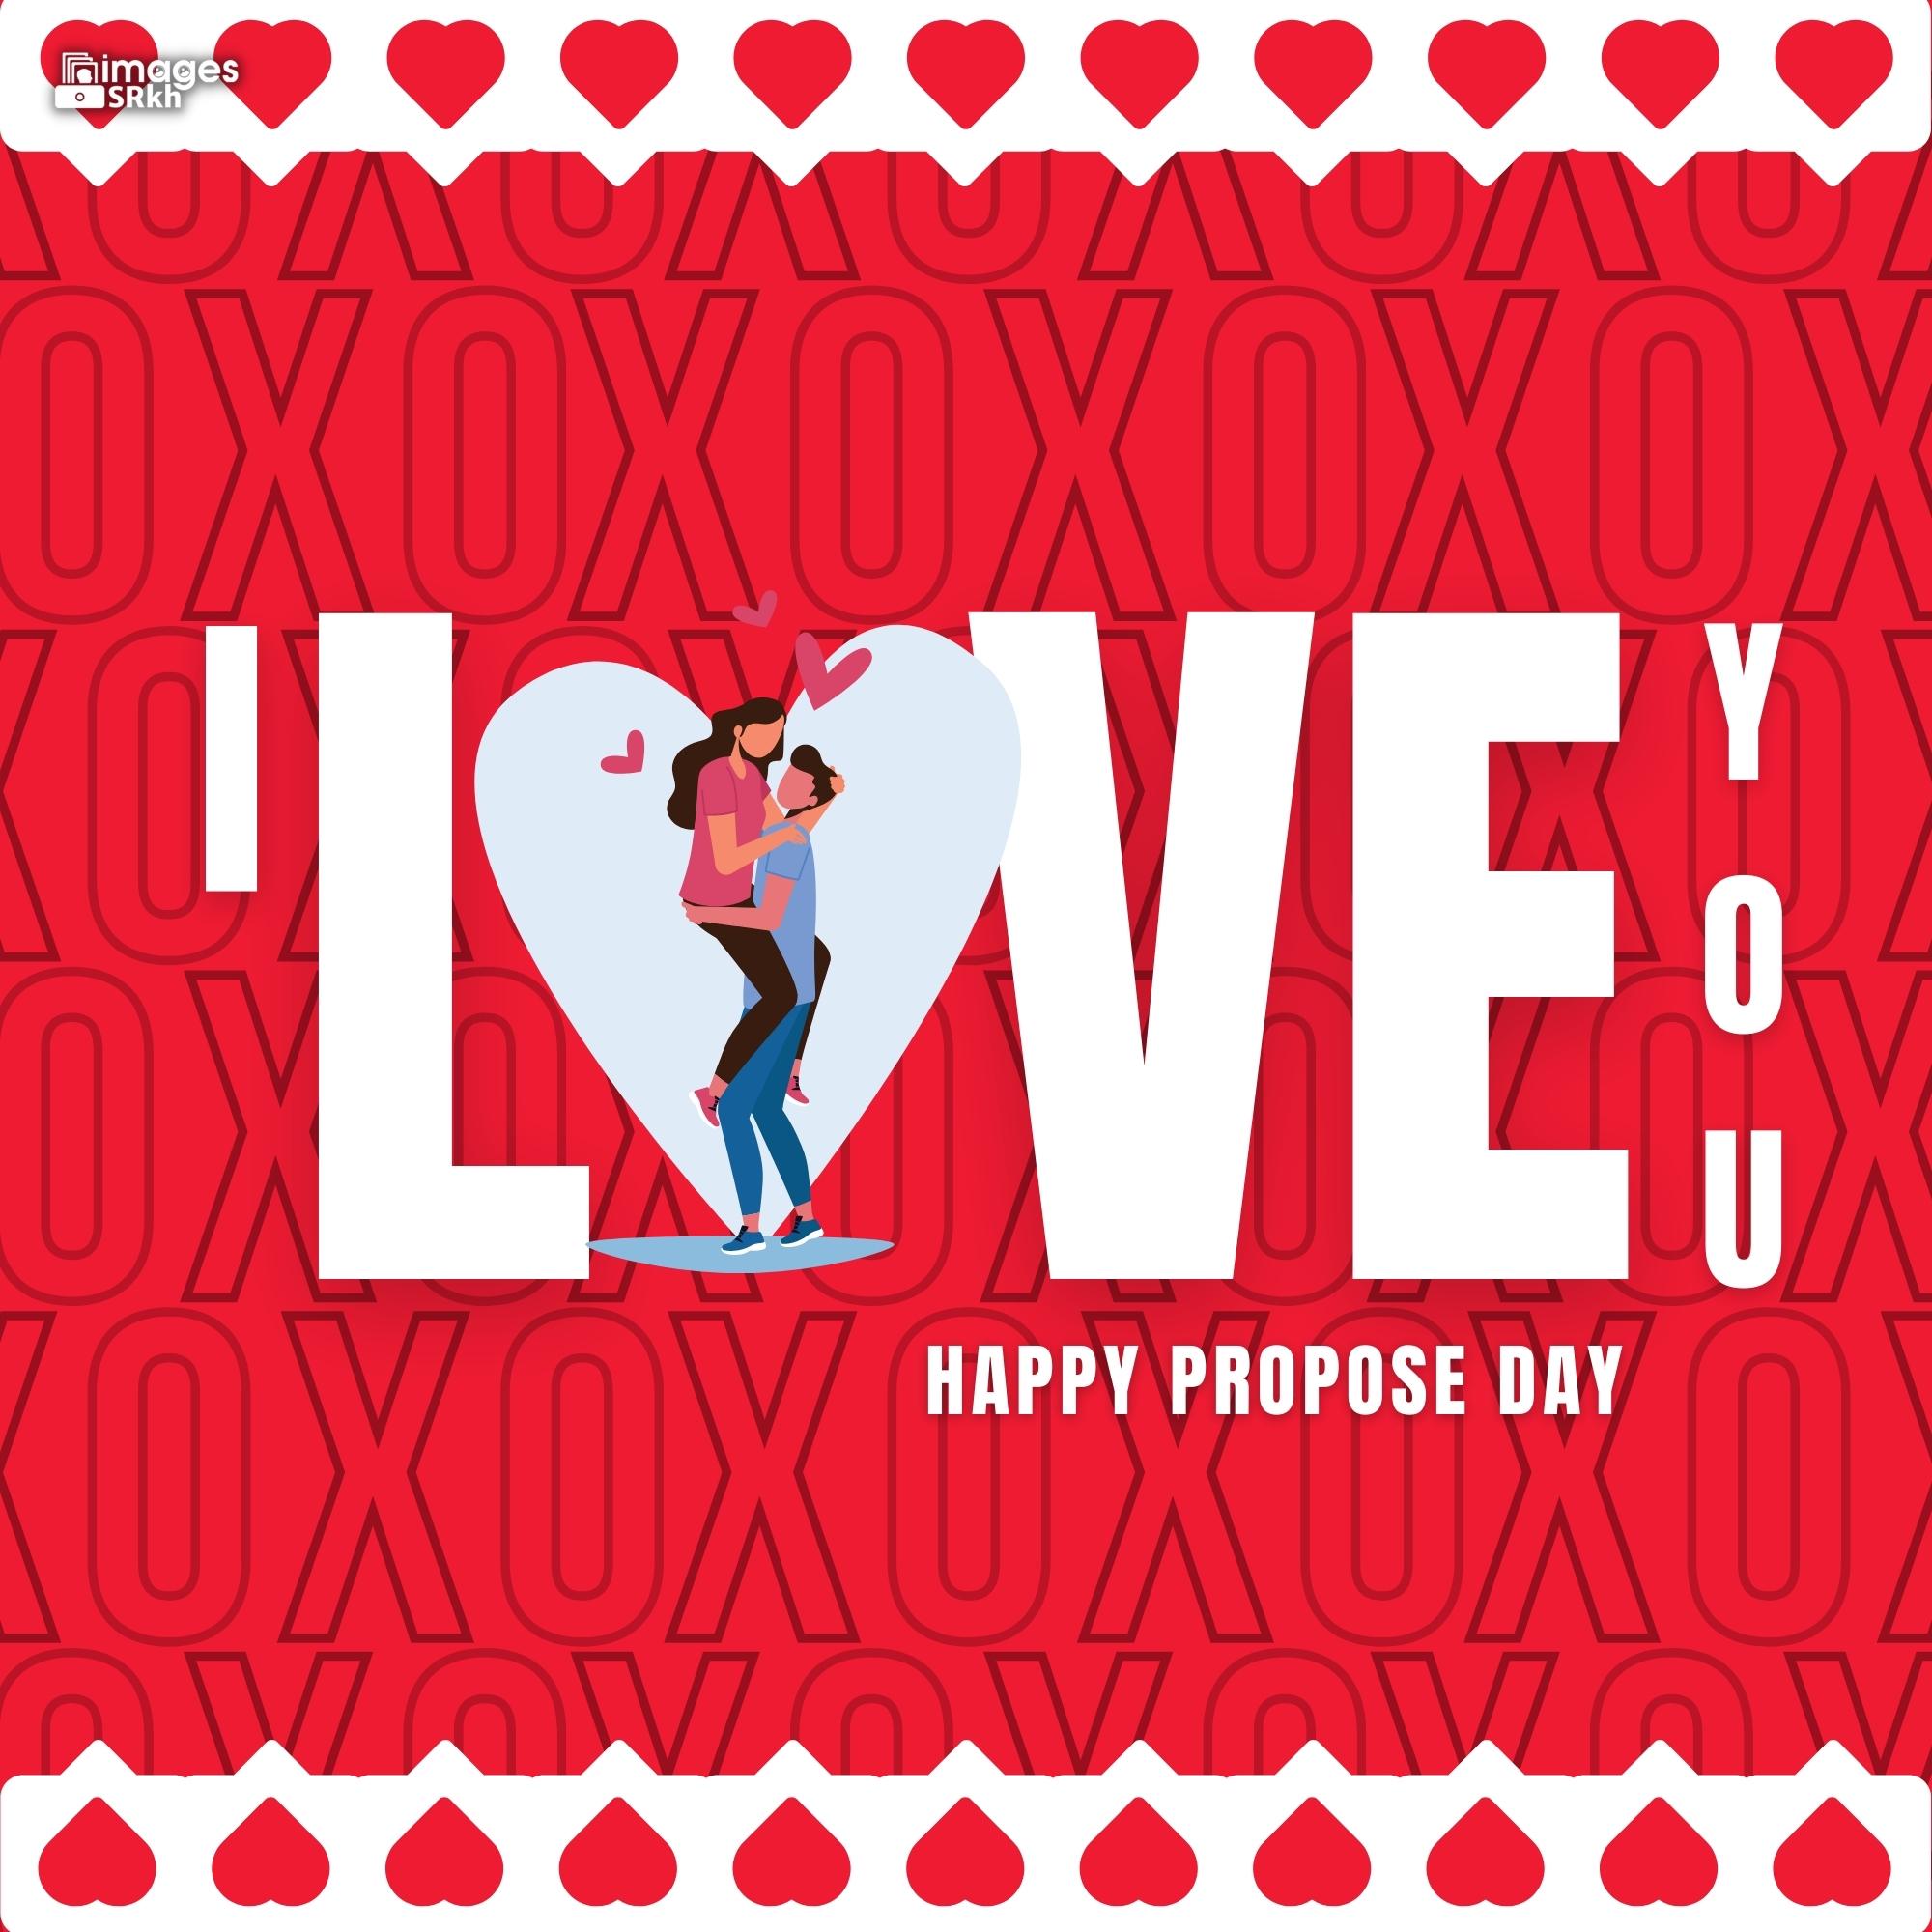 Happy Propose Day Images | 398 | I LOVE YOU